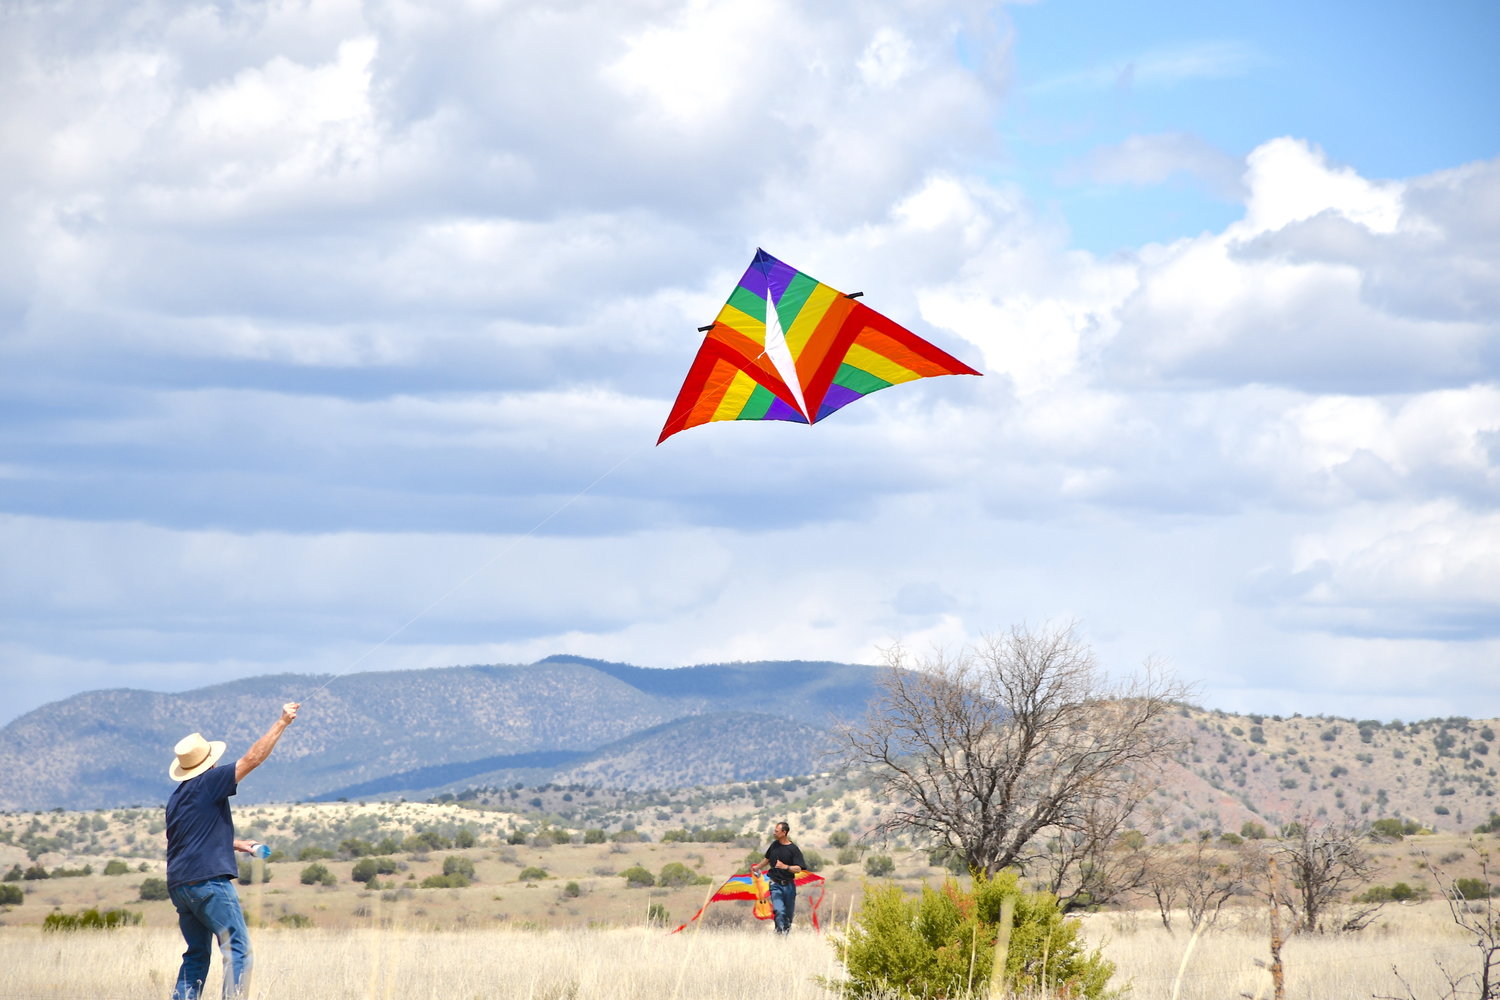 Kites of all shapes and sizes show up for this annual kitefest.